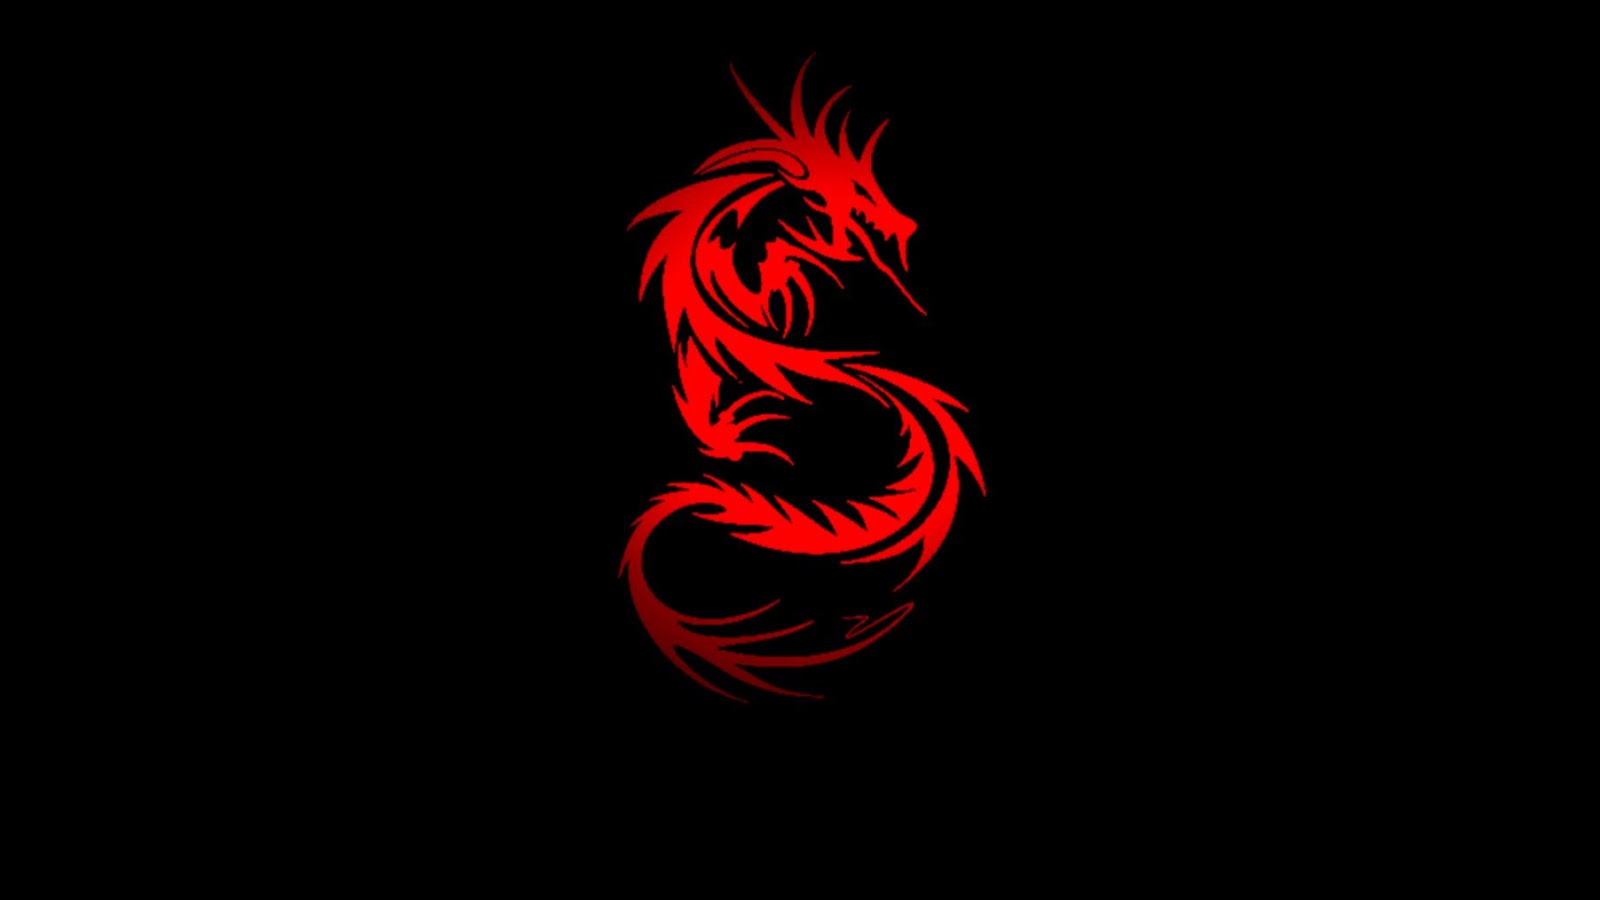 Red Dragon Backgrounds, Compatible - PC, Mobile, Gadgets| 1600x900 px